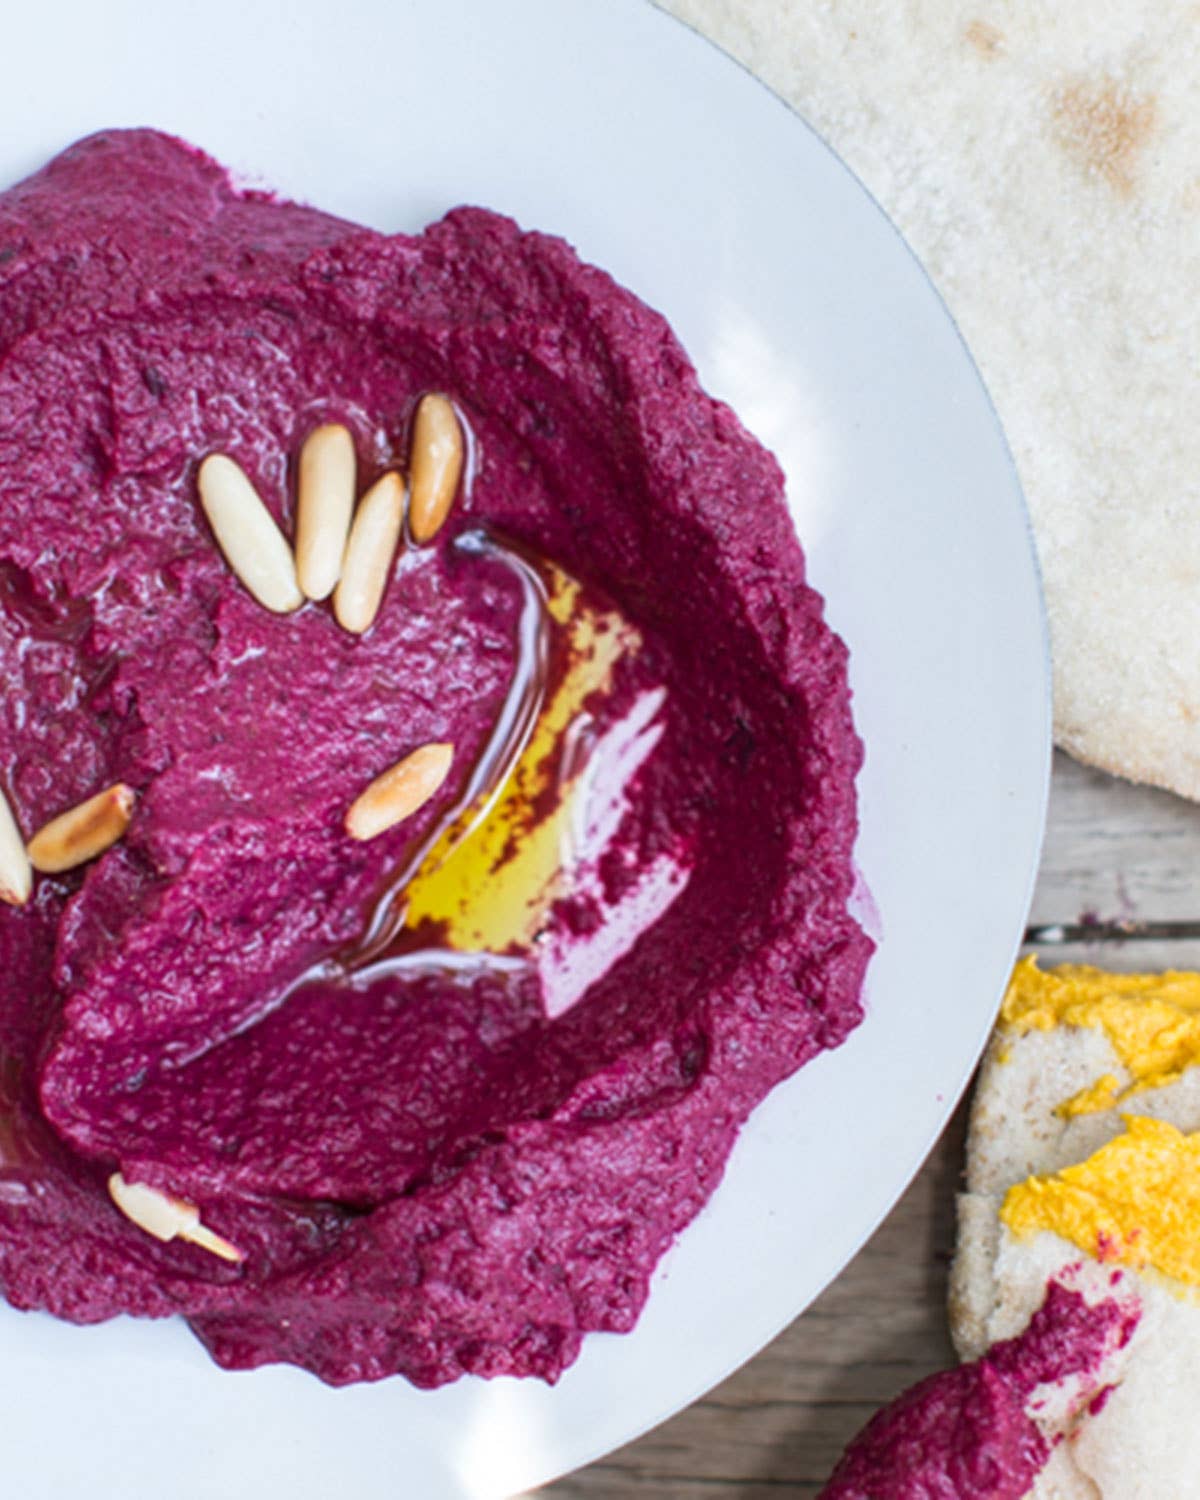 8 New Ways to Eat Beets